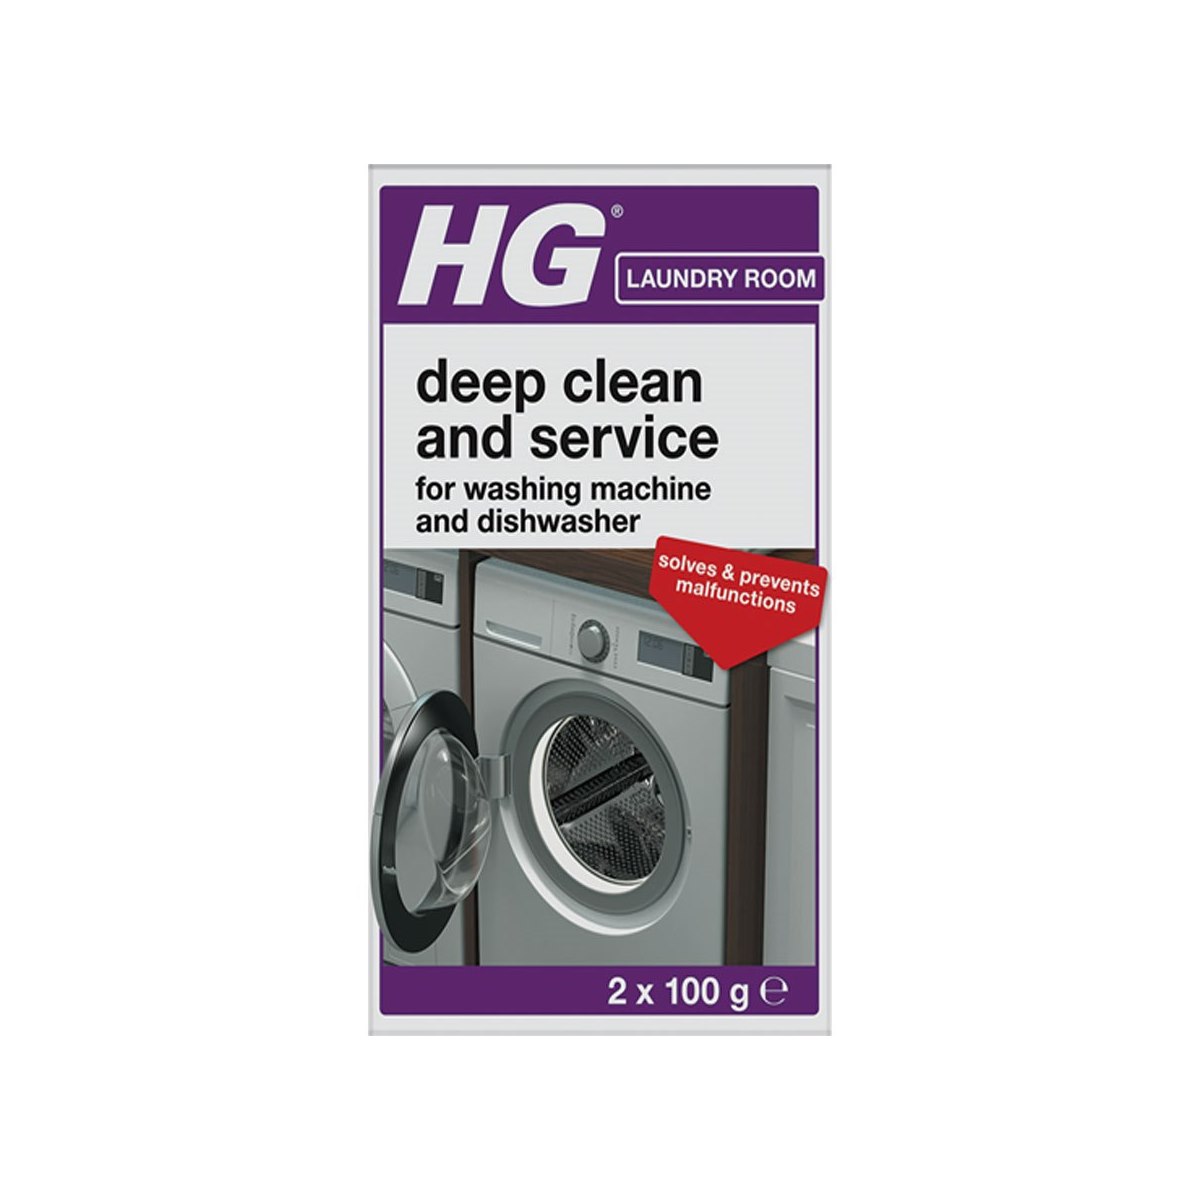 HG Deep Clean and Service for washing machine and dishwasher